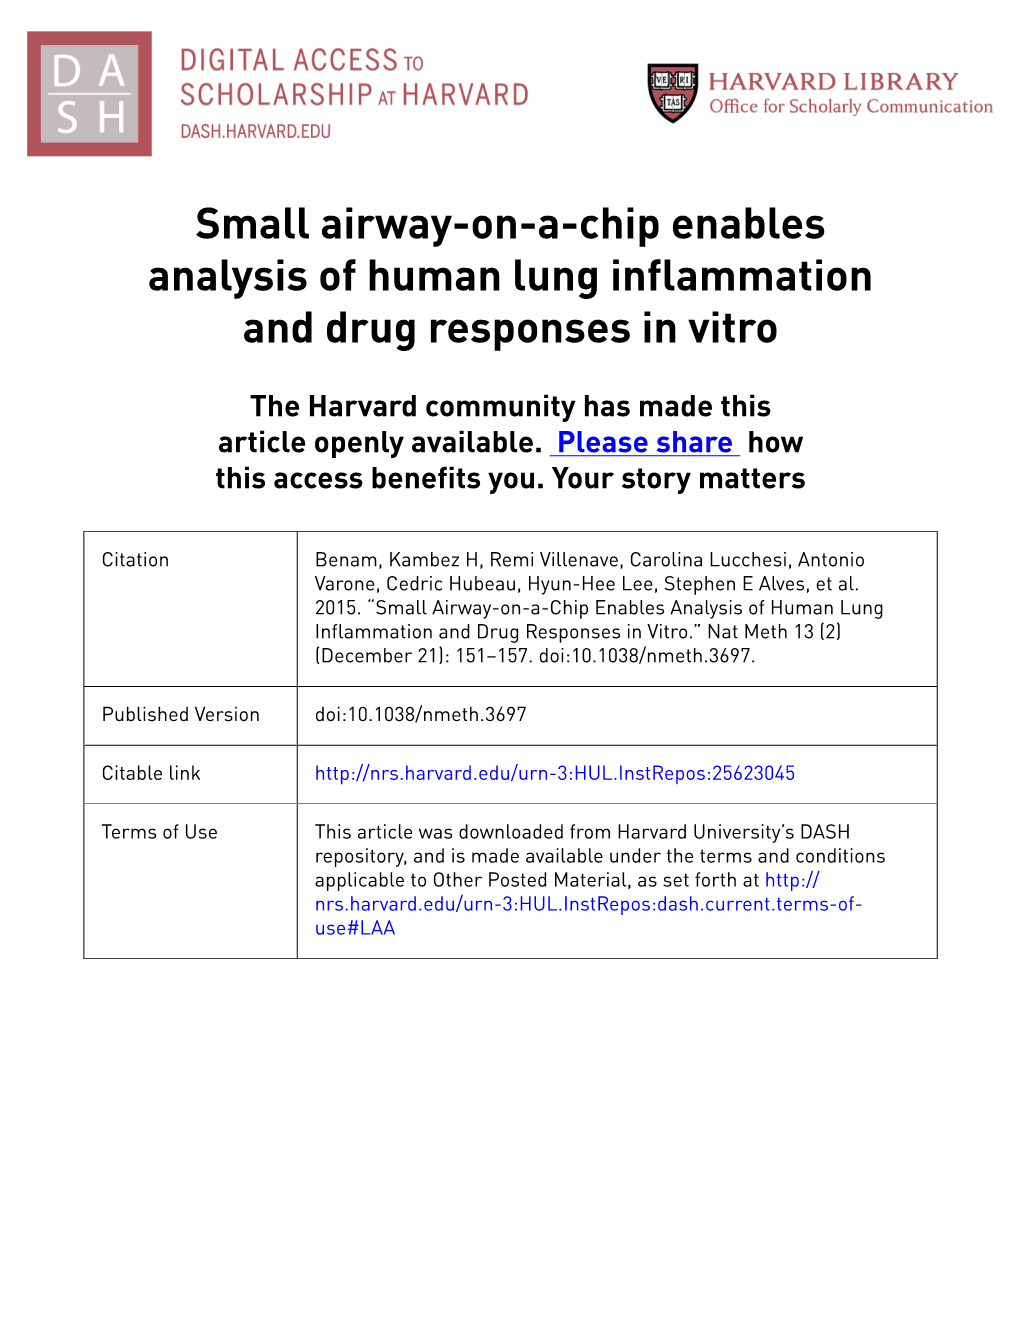 Small Airway-On-A-Chip Enables Analysis of Human Lung Inflammation and Drug Responses in Vitro